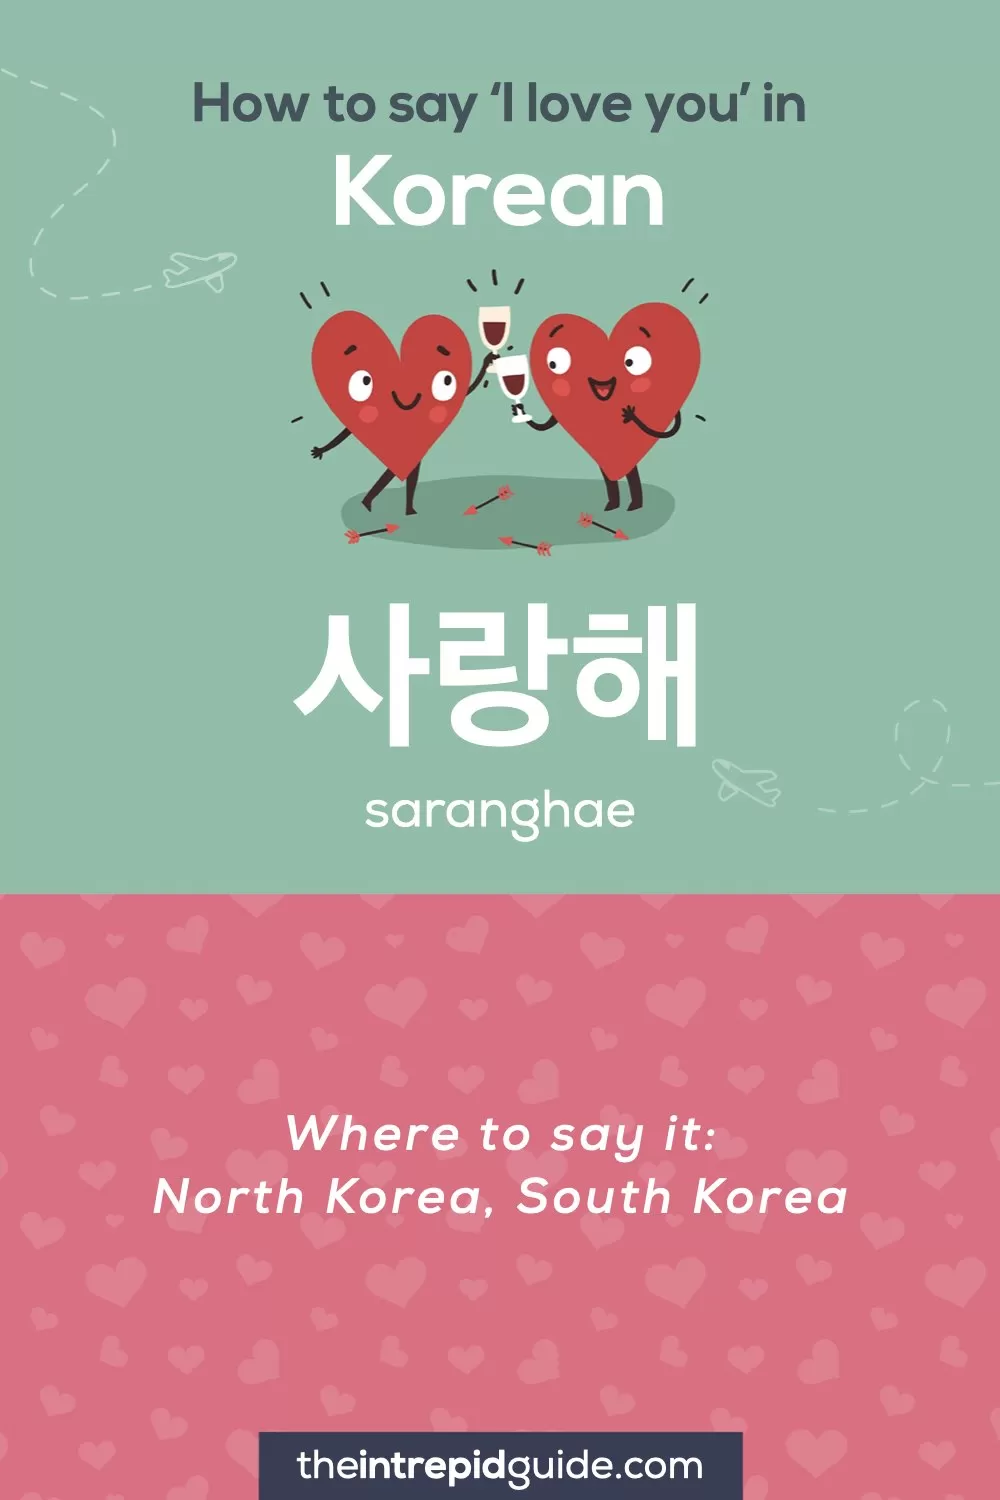 How to say I love you in different languages - Korean - 사랑해